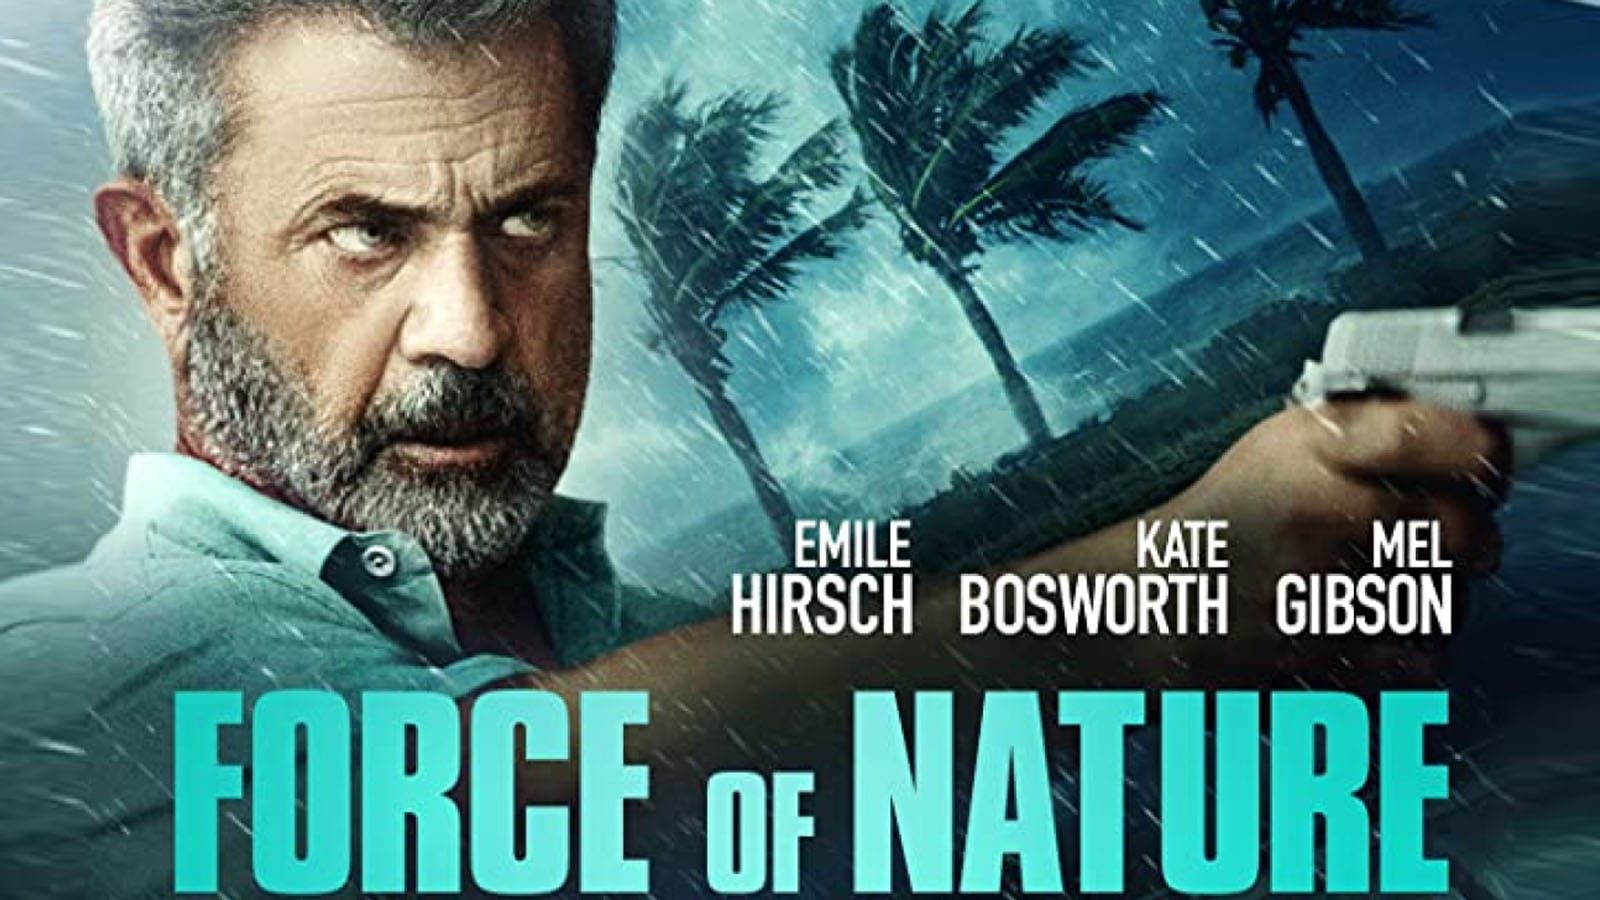 Mel Gibson’s racist Force Of Nature glorifies police brutality